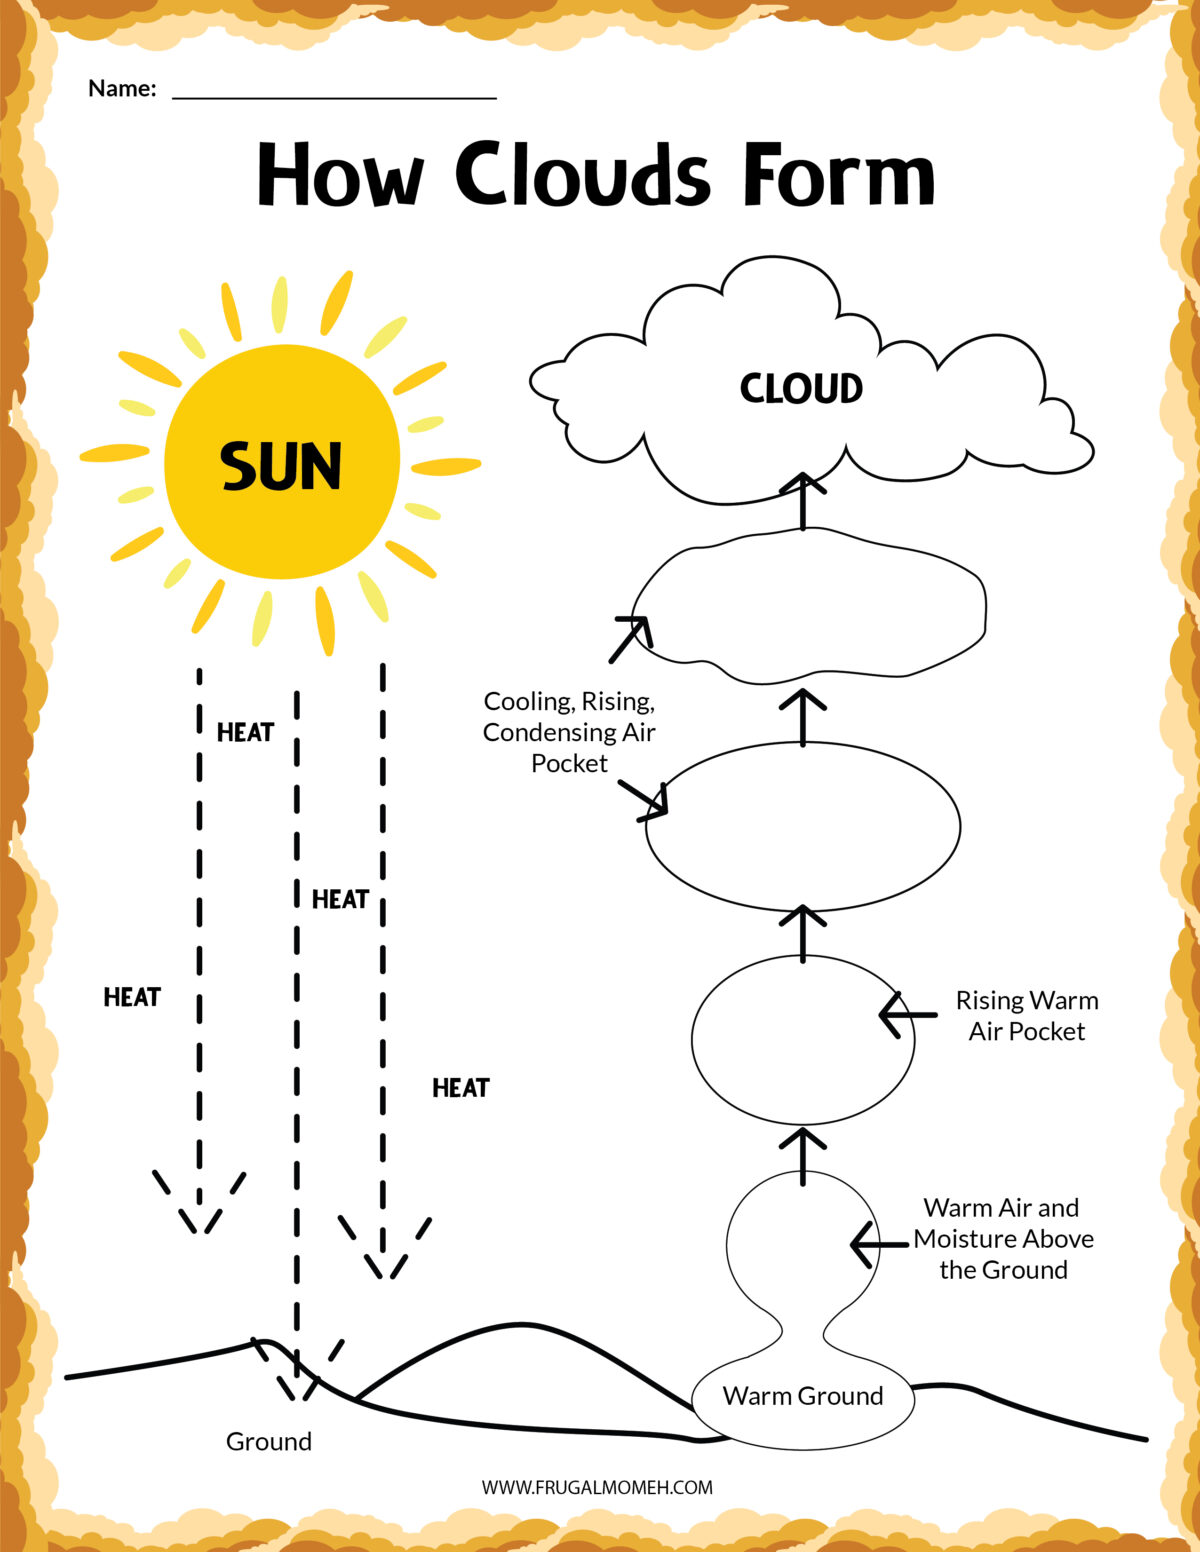 How clouds form printable sheet.